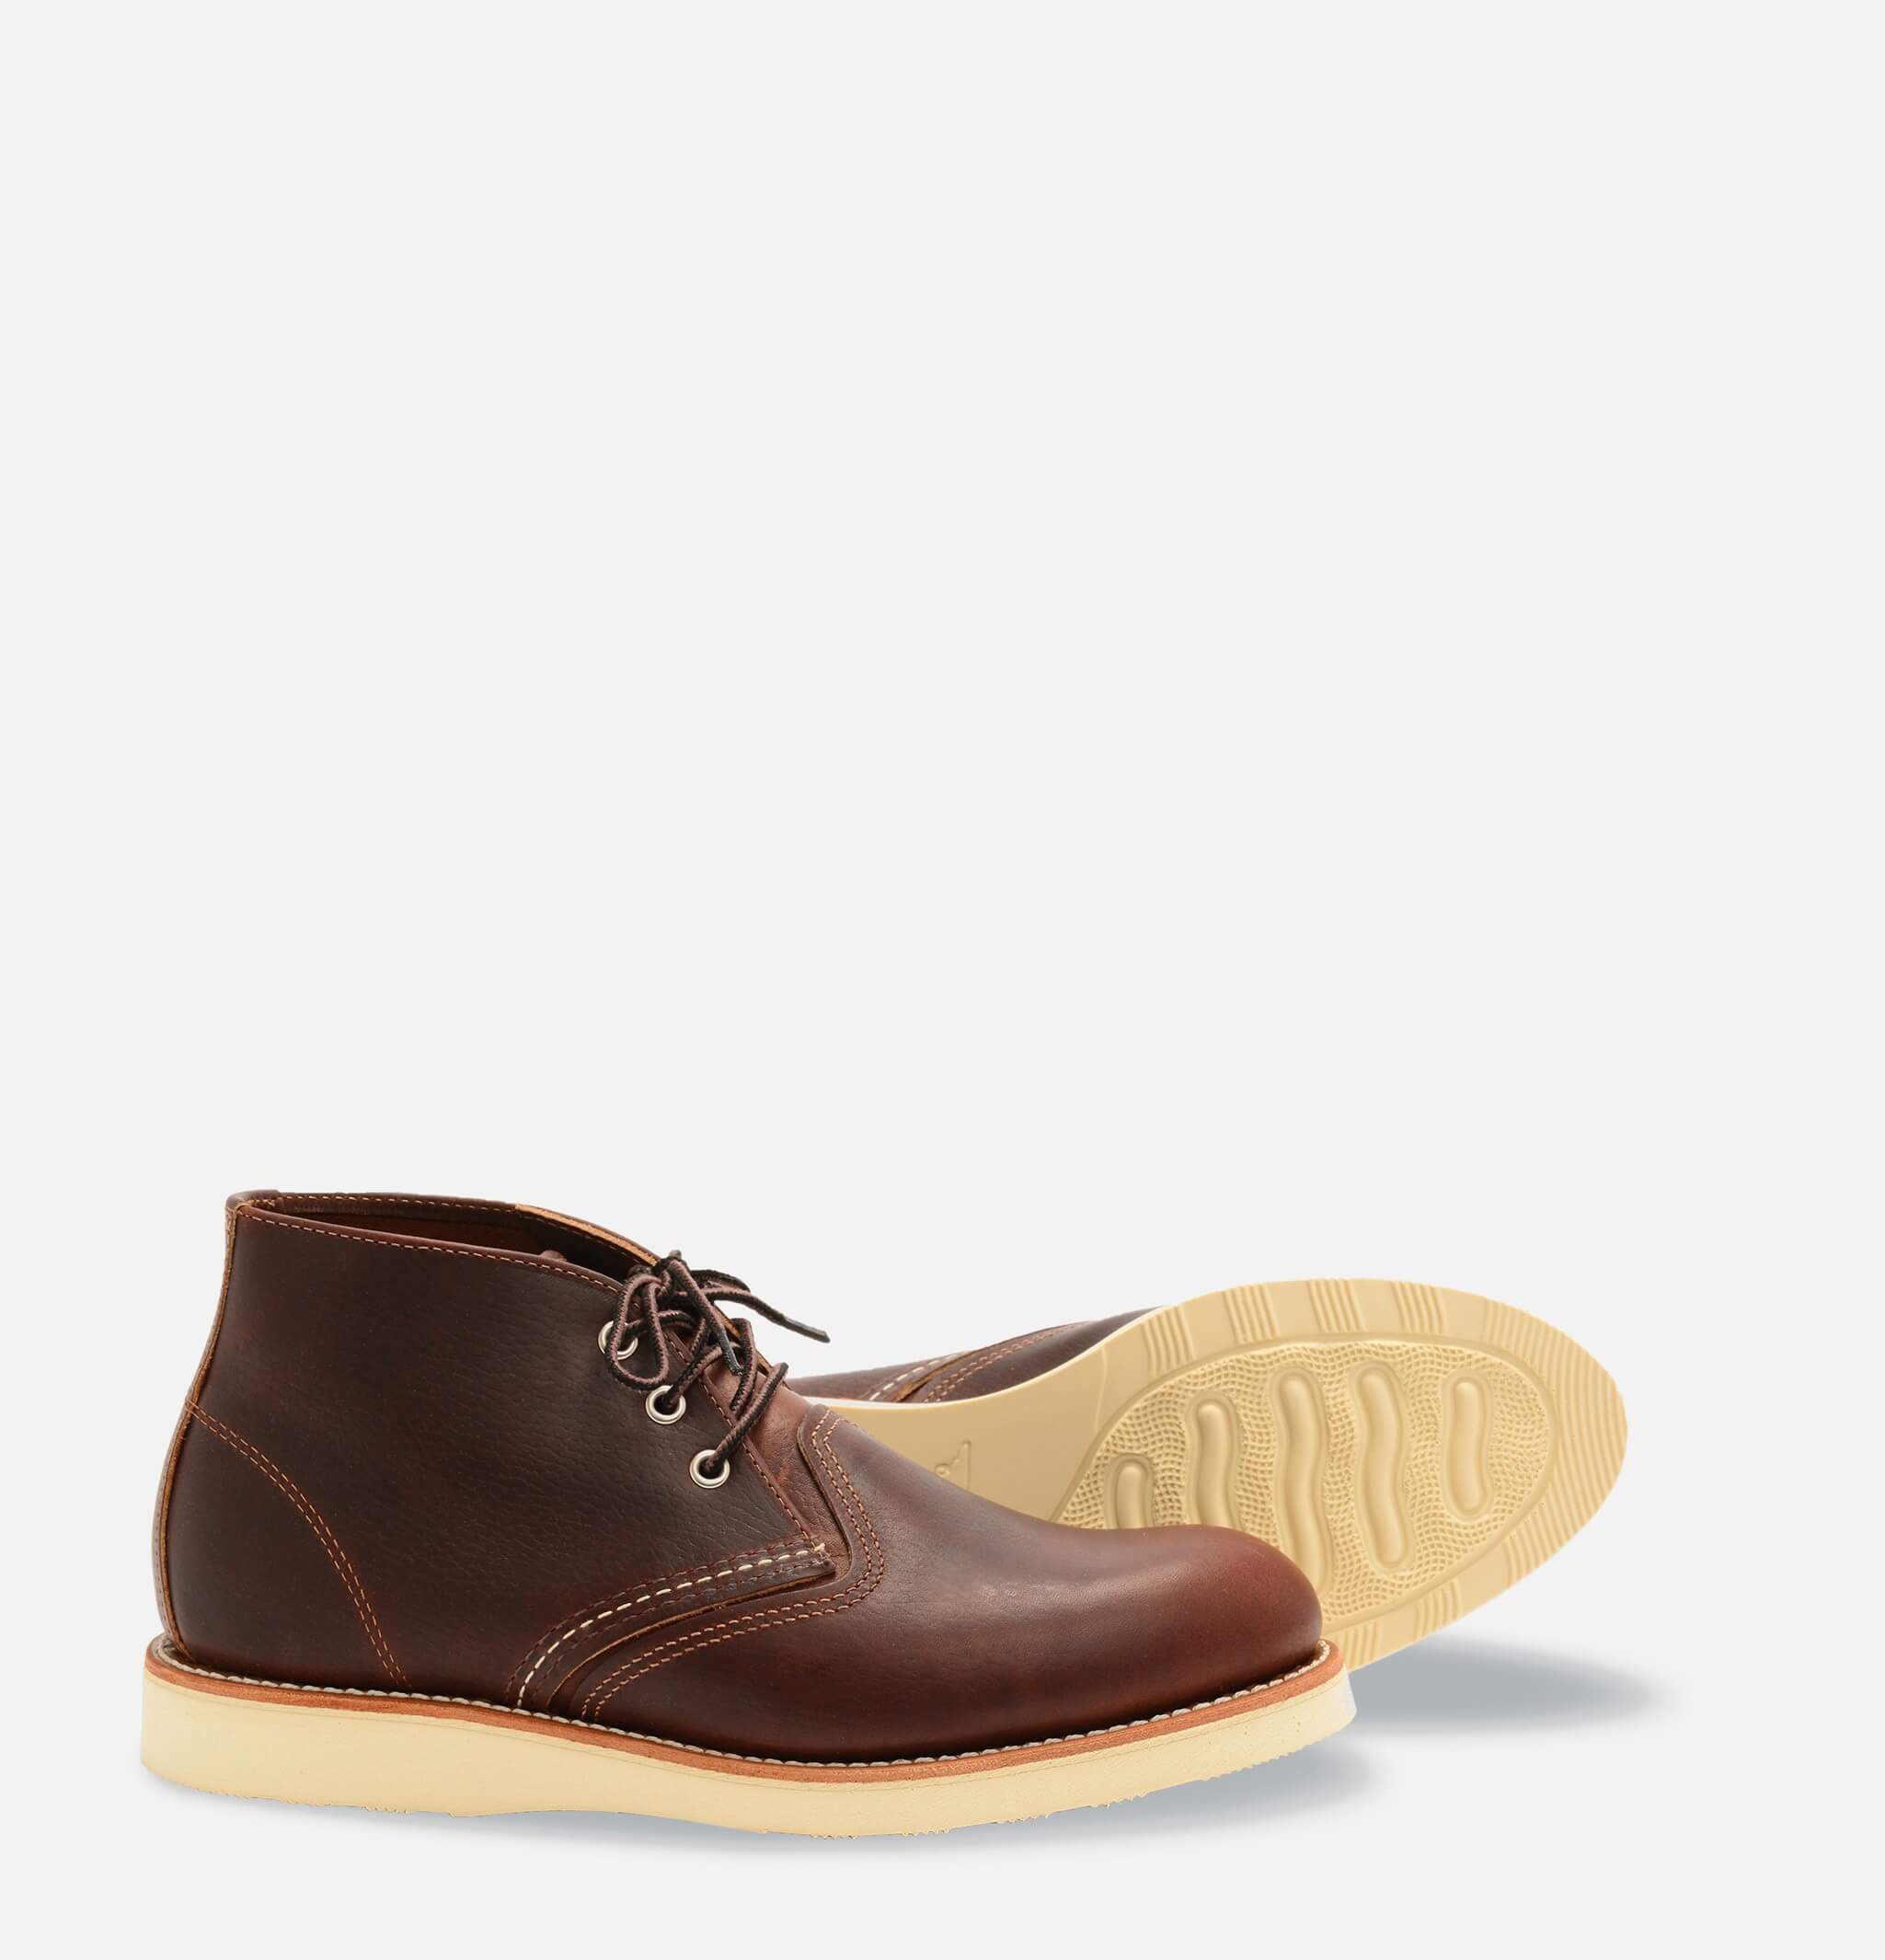 Red wing Shoes - 3141 - Work Chukka - Briar Oil